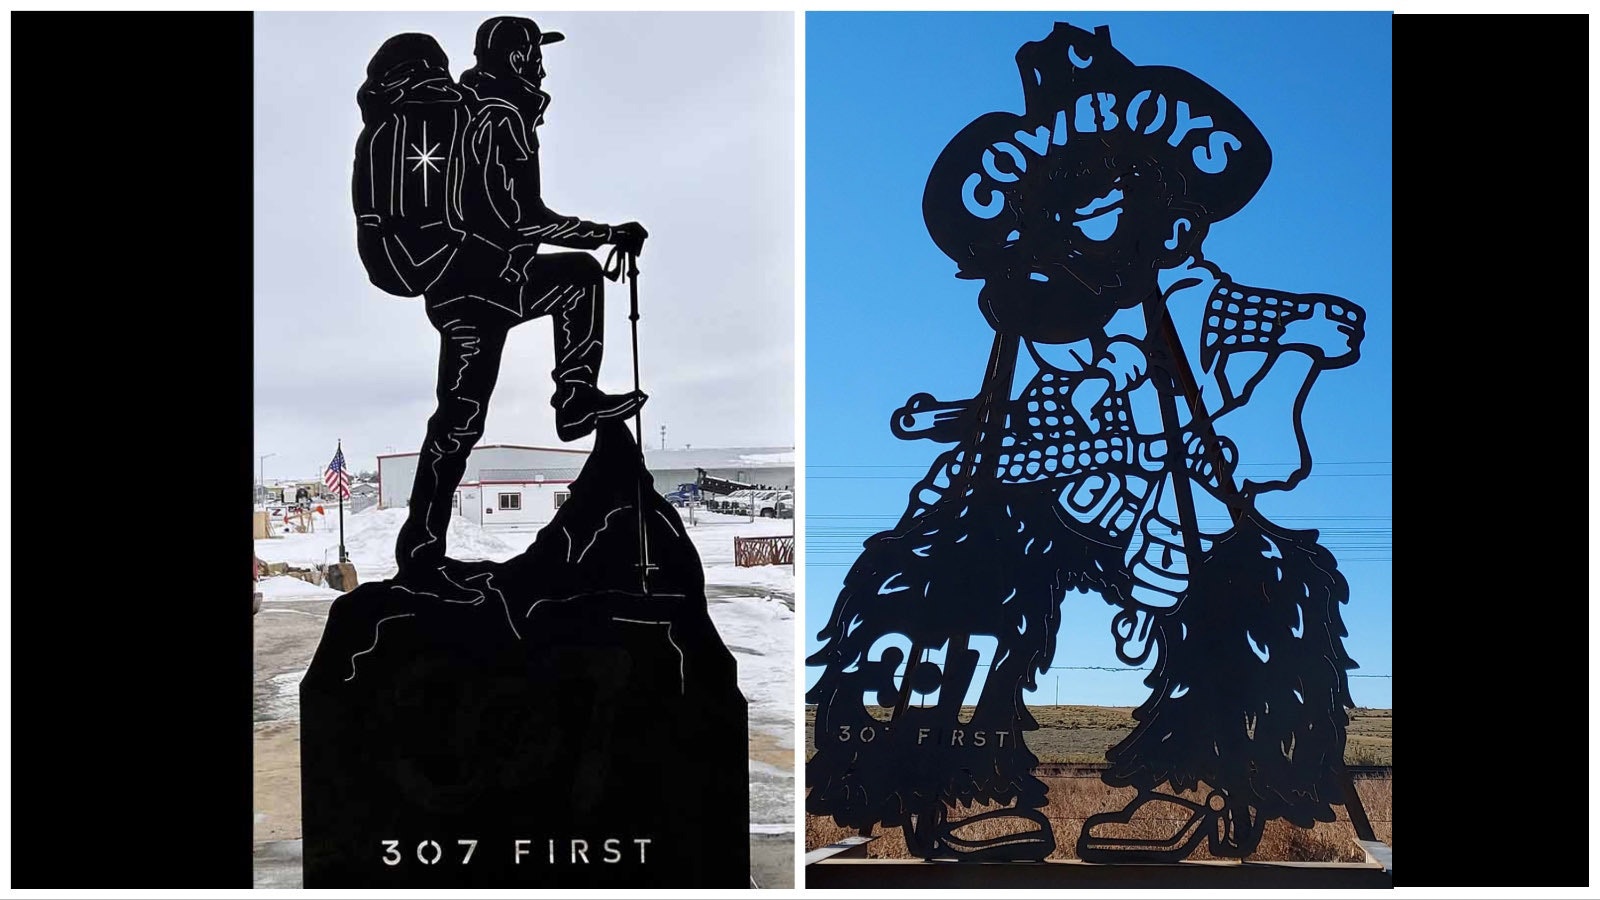 A hiker created for 307 First by Tom Ford. Each silhouette is sponsored by a Wyoming company and placed on property owned by Wyoming residents. Also shown is Cowboy Joe.